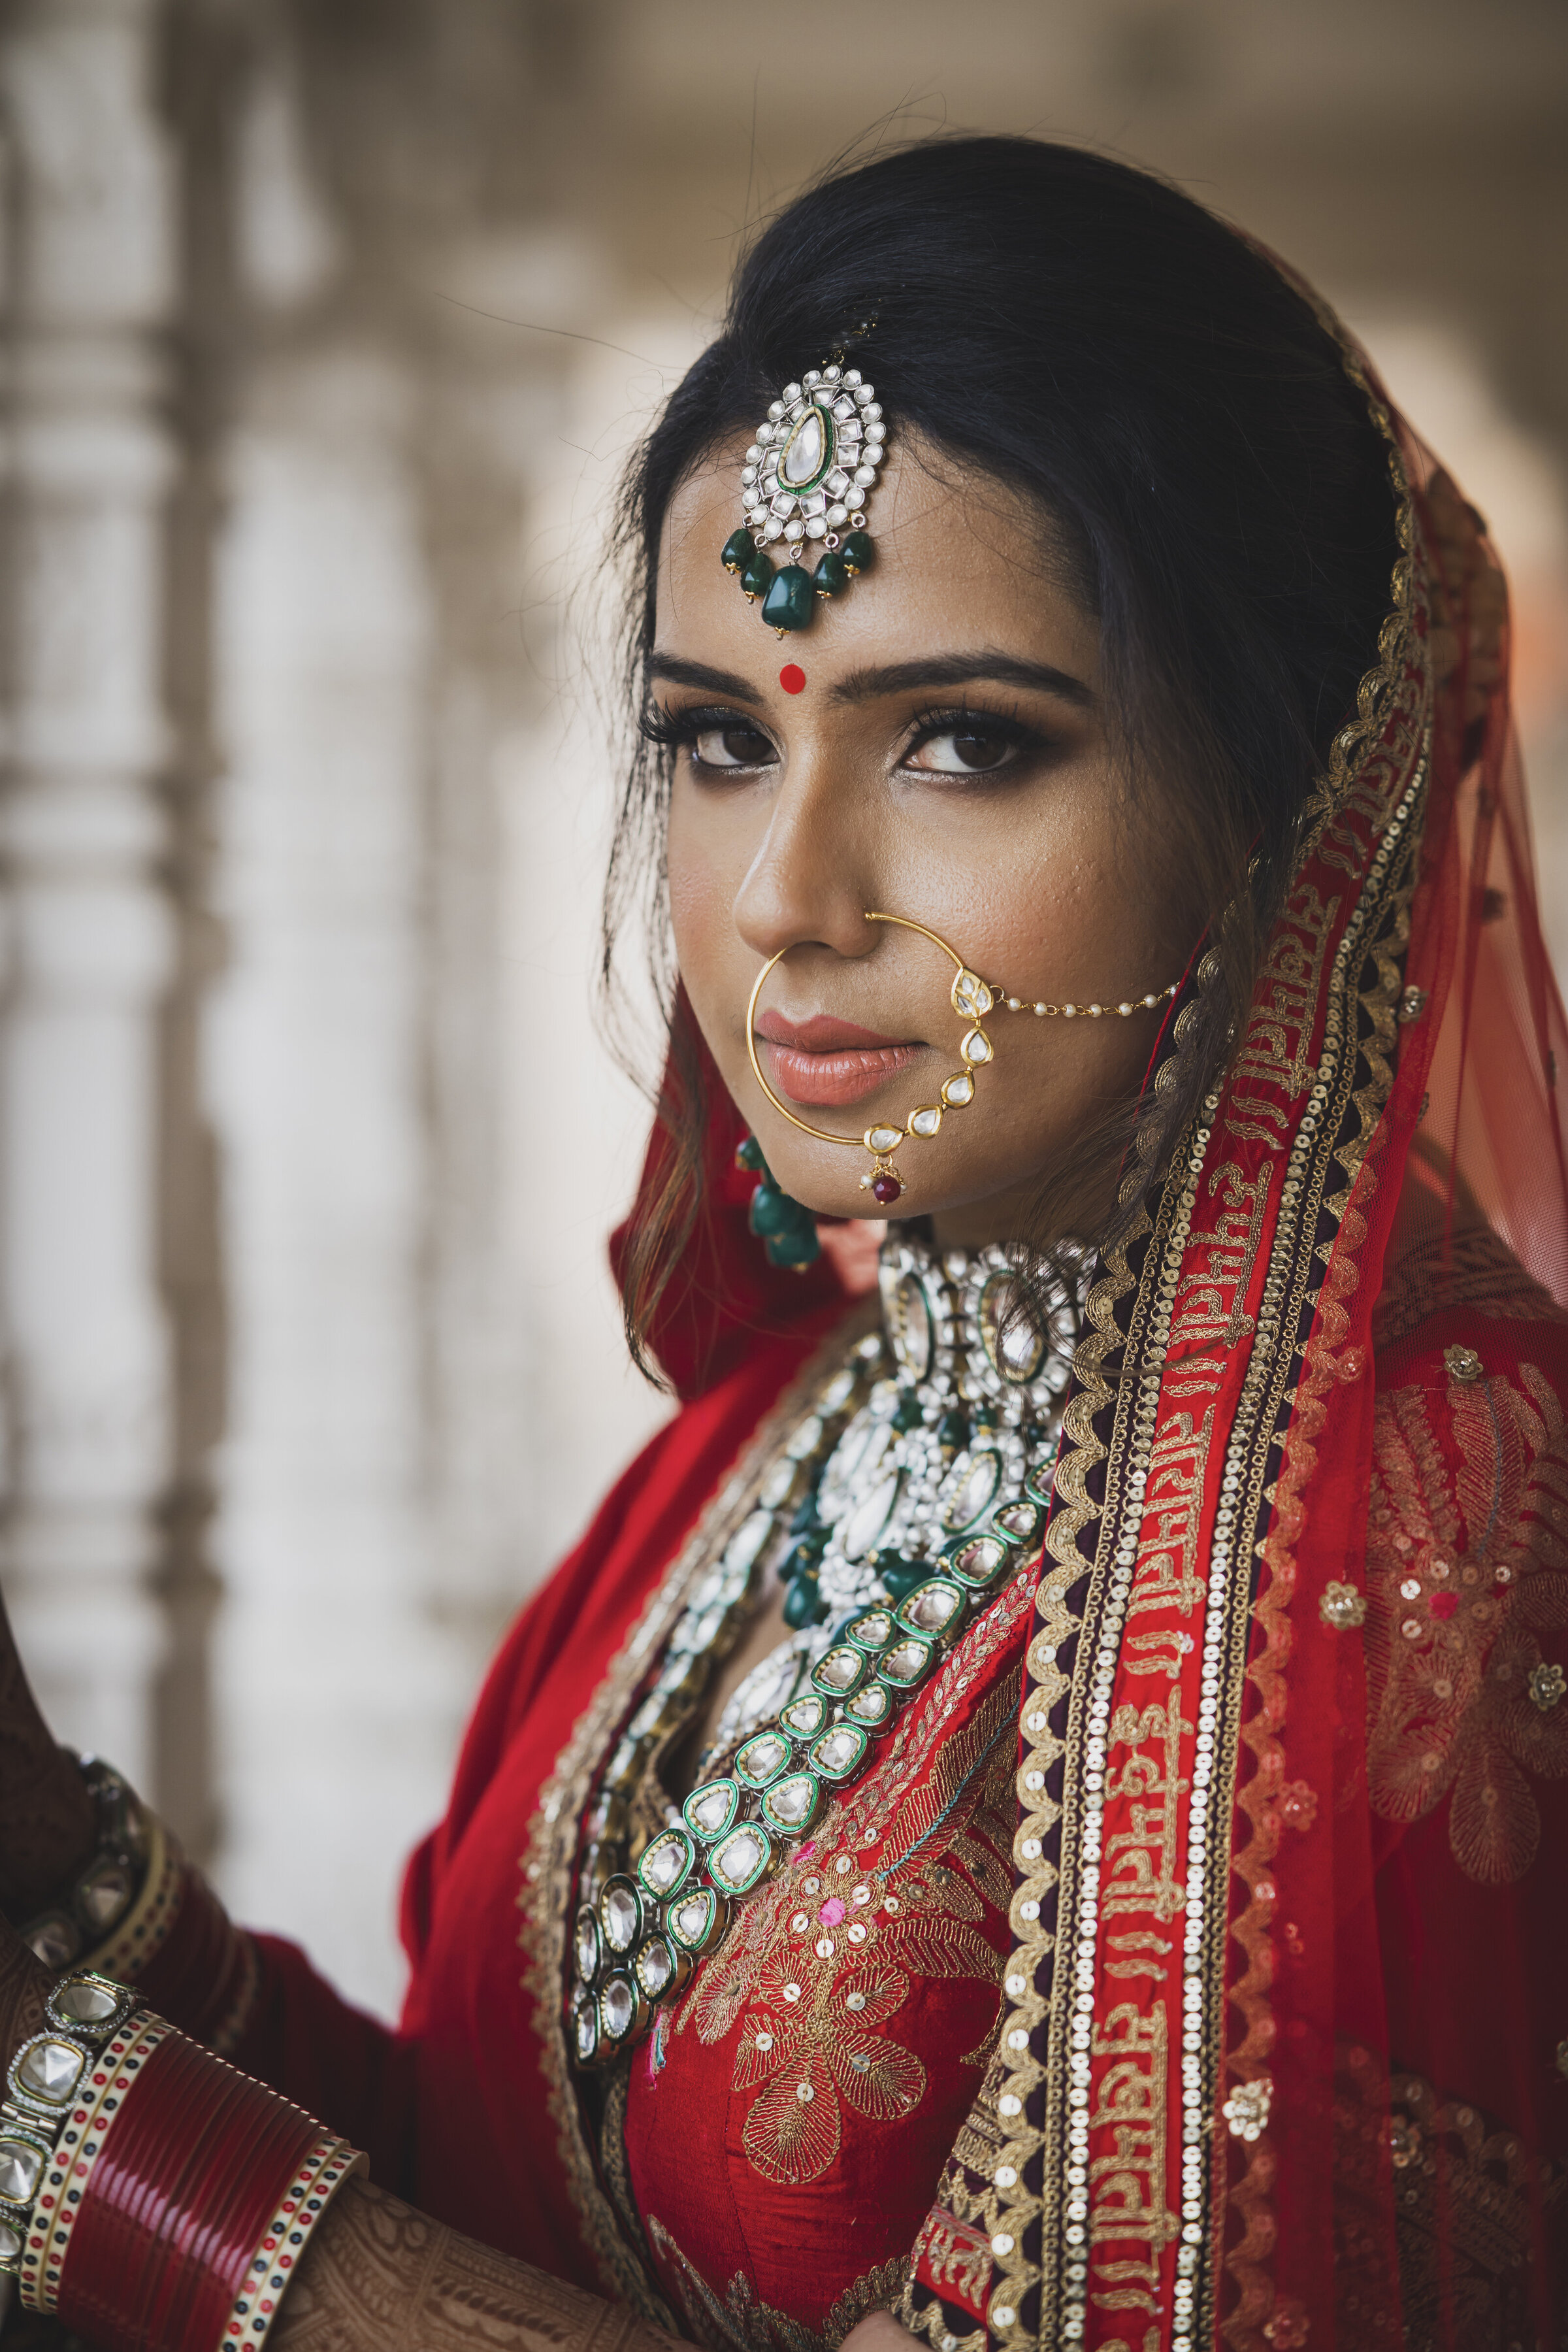 Indian bride with nose ring attached to ear looks at camera.